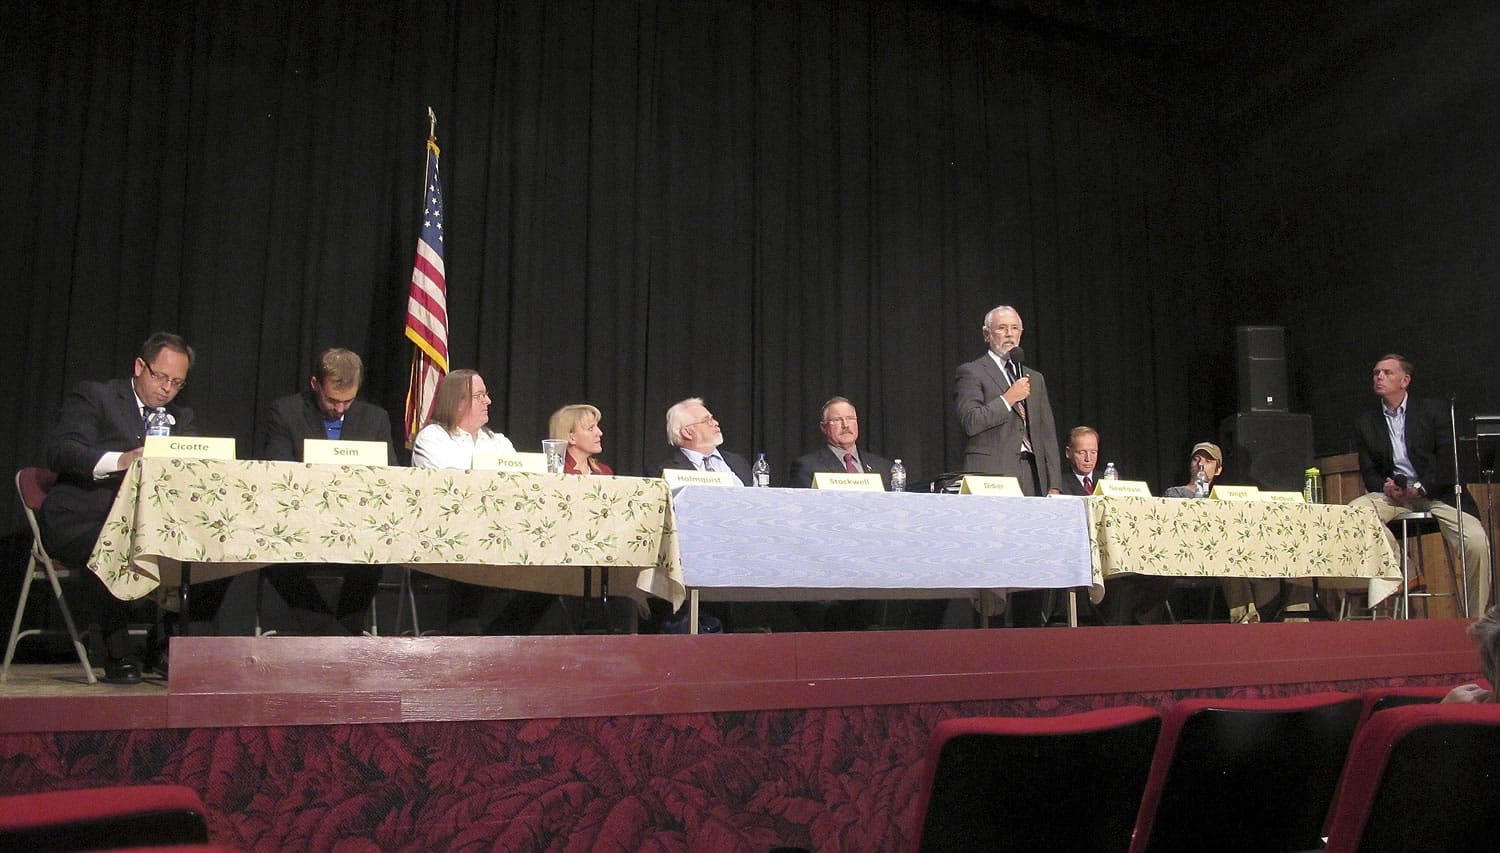 Dan Newhouse, a U.S. House candidates running in the 4th District of Washington, standing, speaks as other candidates listen at a forum in this photo taken on Monday in Othello. A total of 13 candidates are running for an open seat.